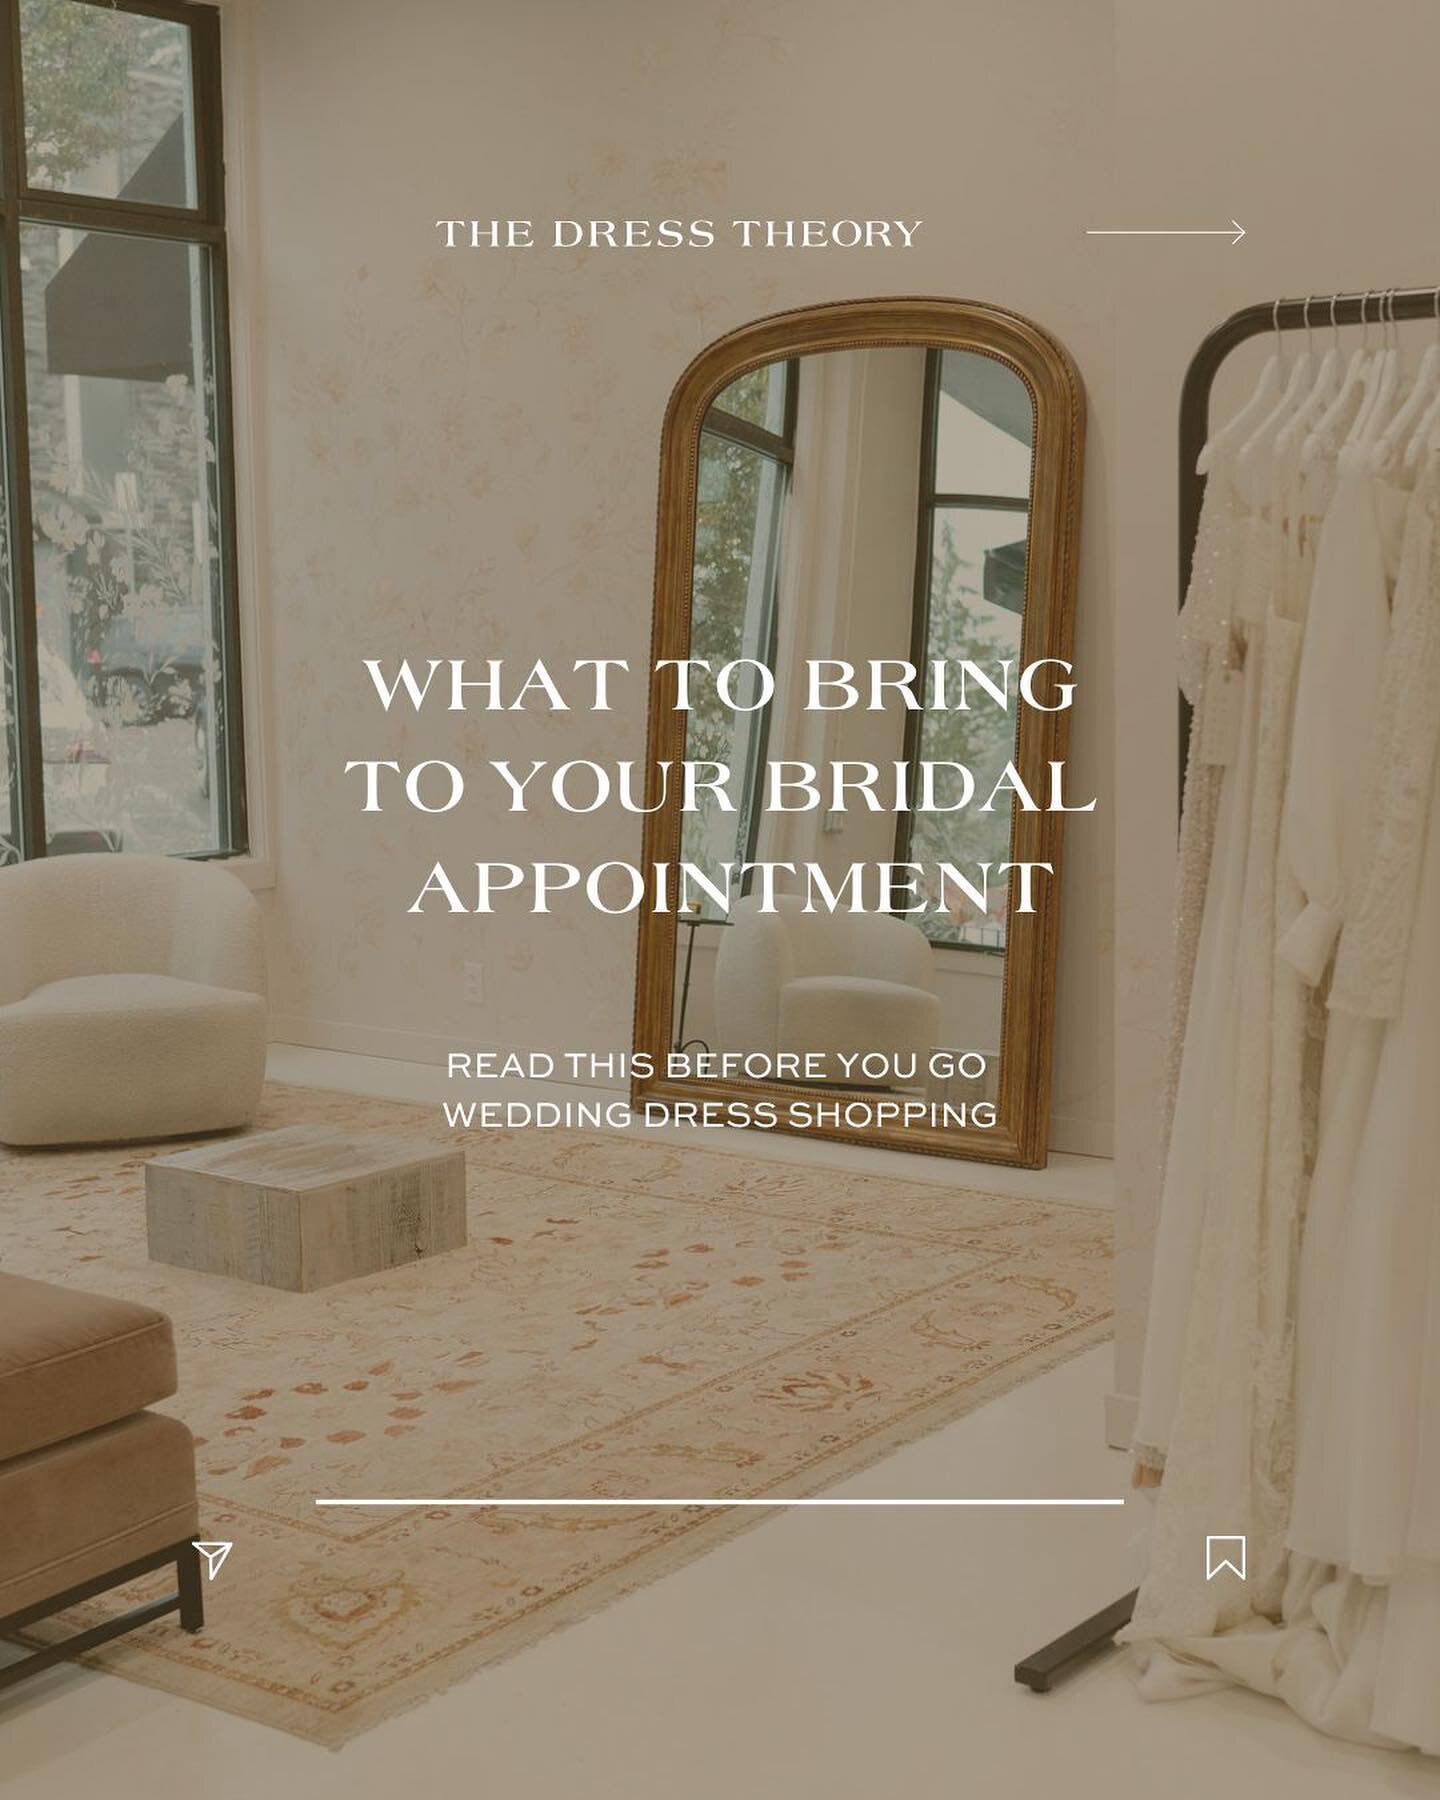 Swipe through to get the inside scoop from our stylists on what to bring to your bridal appointment. ✨⁠
⁠
⁠
[ Wedding Dress, Timeless bride, Engaged, Bridal Gown, Boho Wedding, Wedding Dress Style, Bridal Style, San Diego Bride, Nashville Bride, Seat